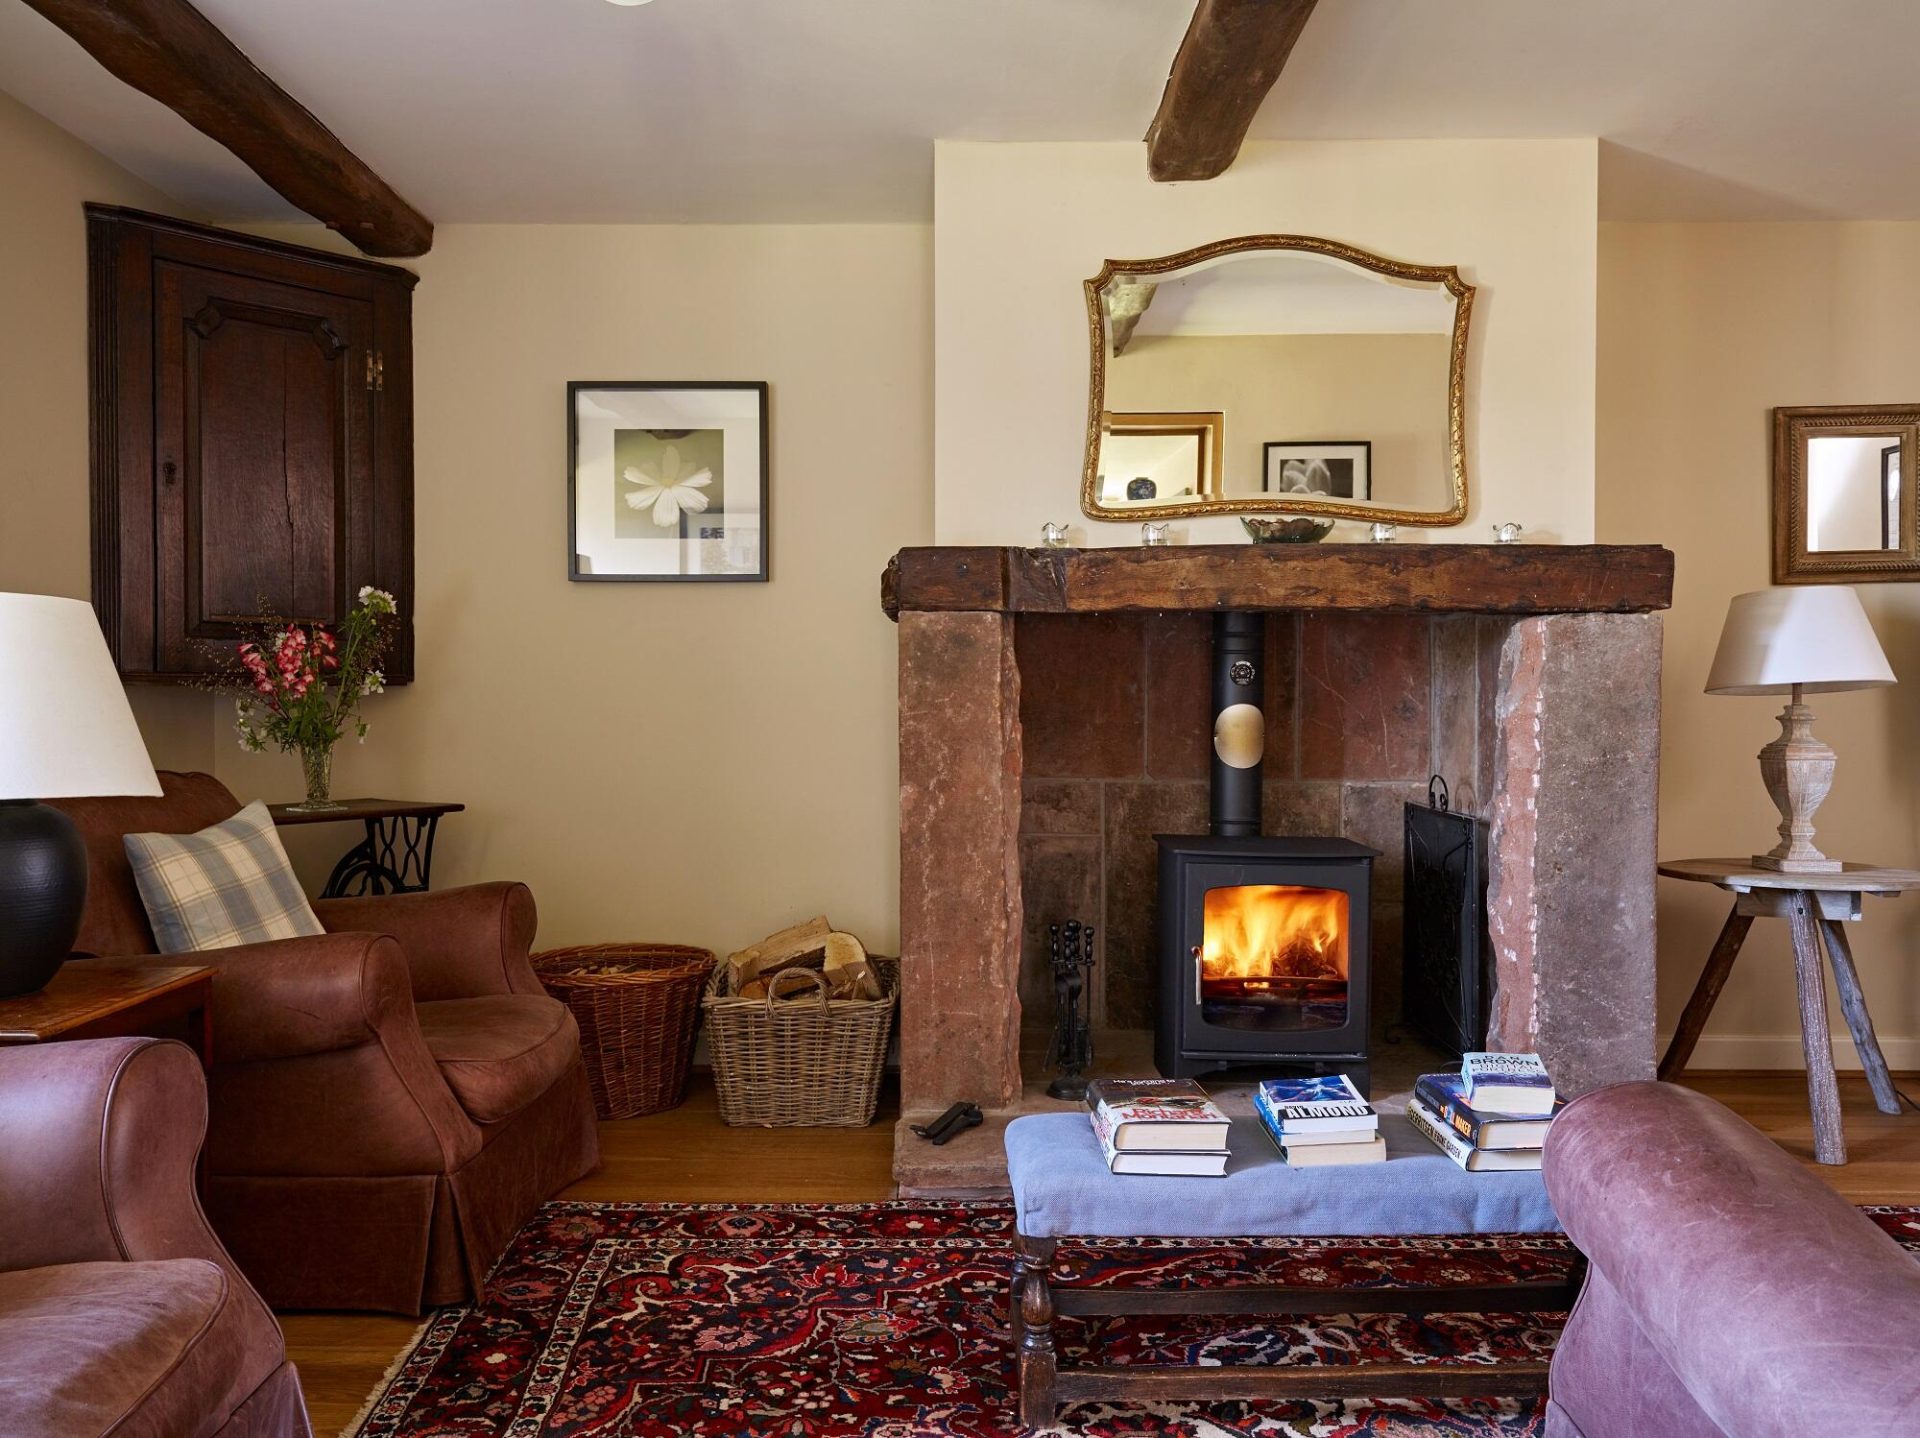 Elk-Cottage-luxury-dogs-welcome-holiday-cottage-near-lake-district-with-open-fire-the-rowley-estates